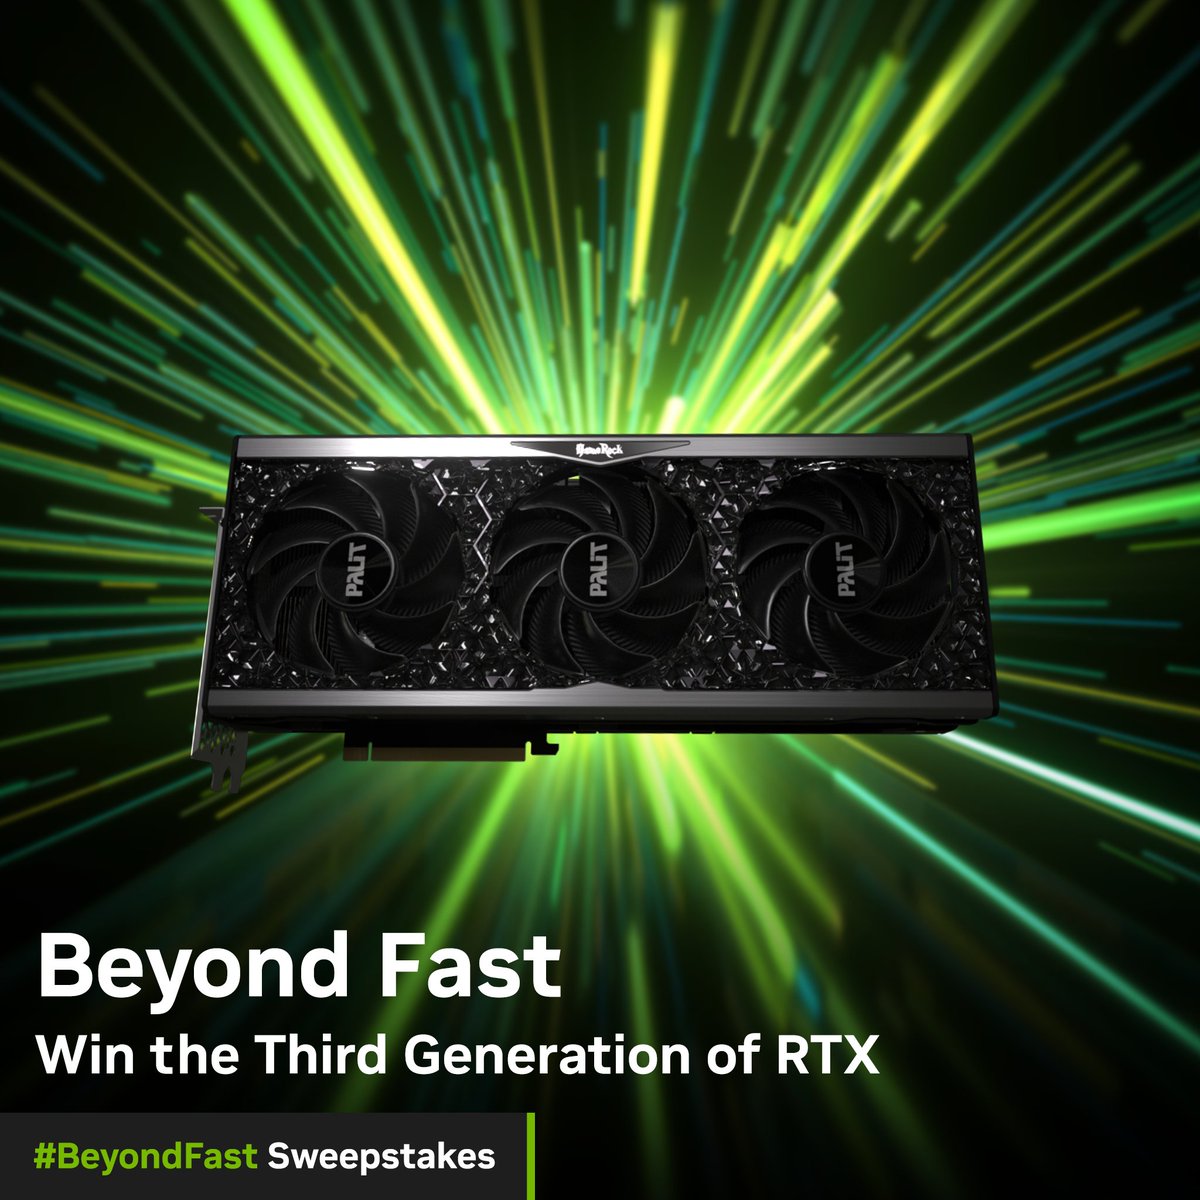 Today’s #BeyondFast GeForce RTX 4090 Card Prize Spotlight: @Palit_Global Key Features: ⚫ Midnight Kaleidoscope Design ⚫ One Two SYNC Tech ⚫ Gale Hunter Fans Want your chance to win this card? 1. RT this post 2. Reply with the first game you'll play on it!